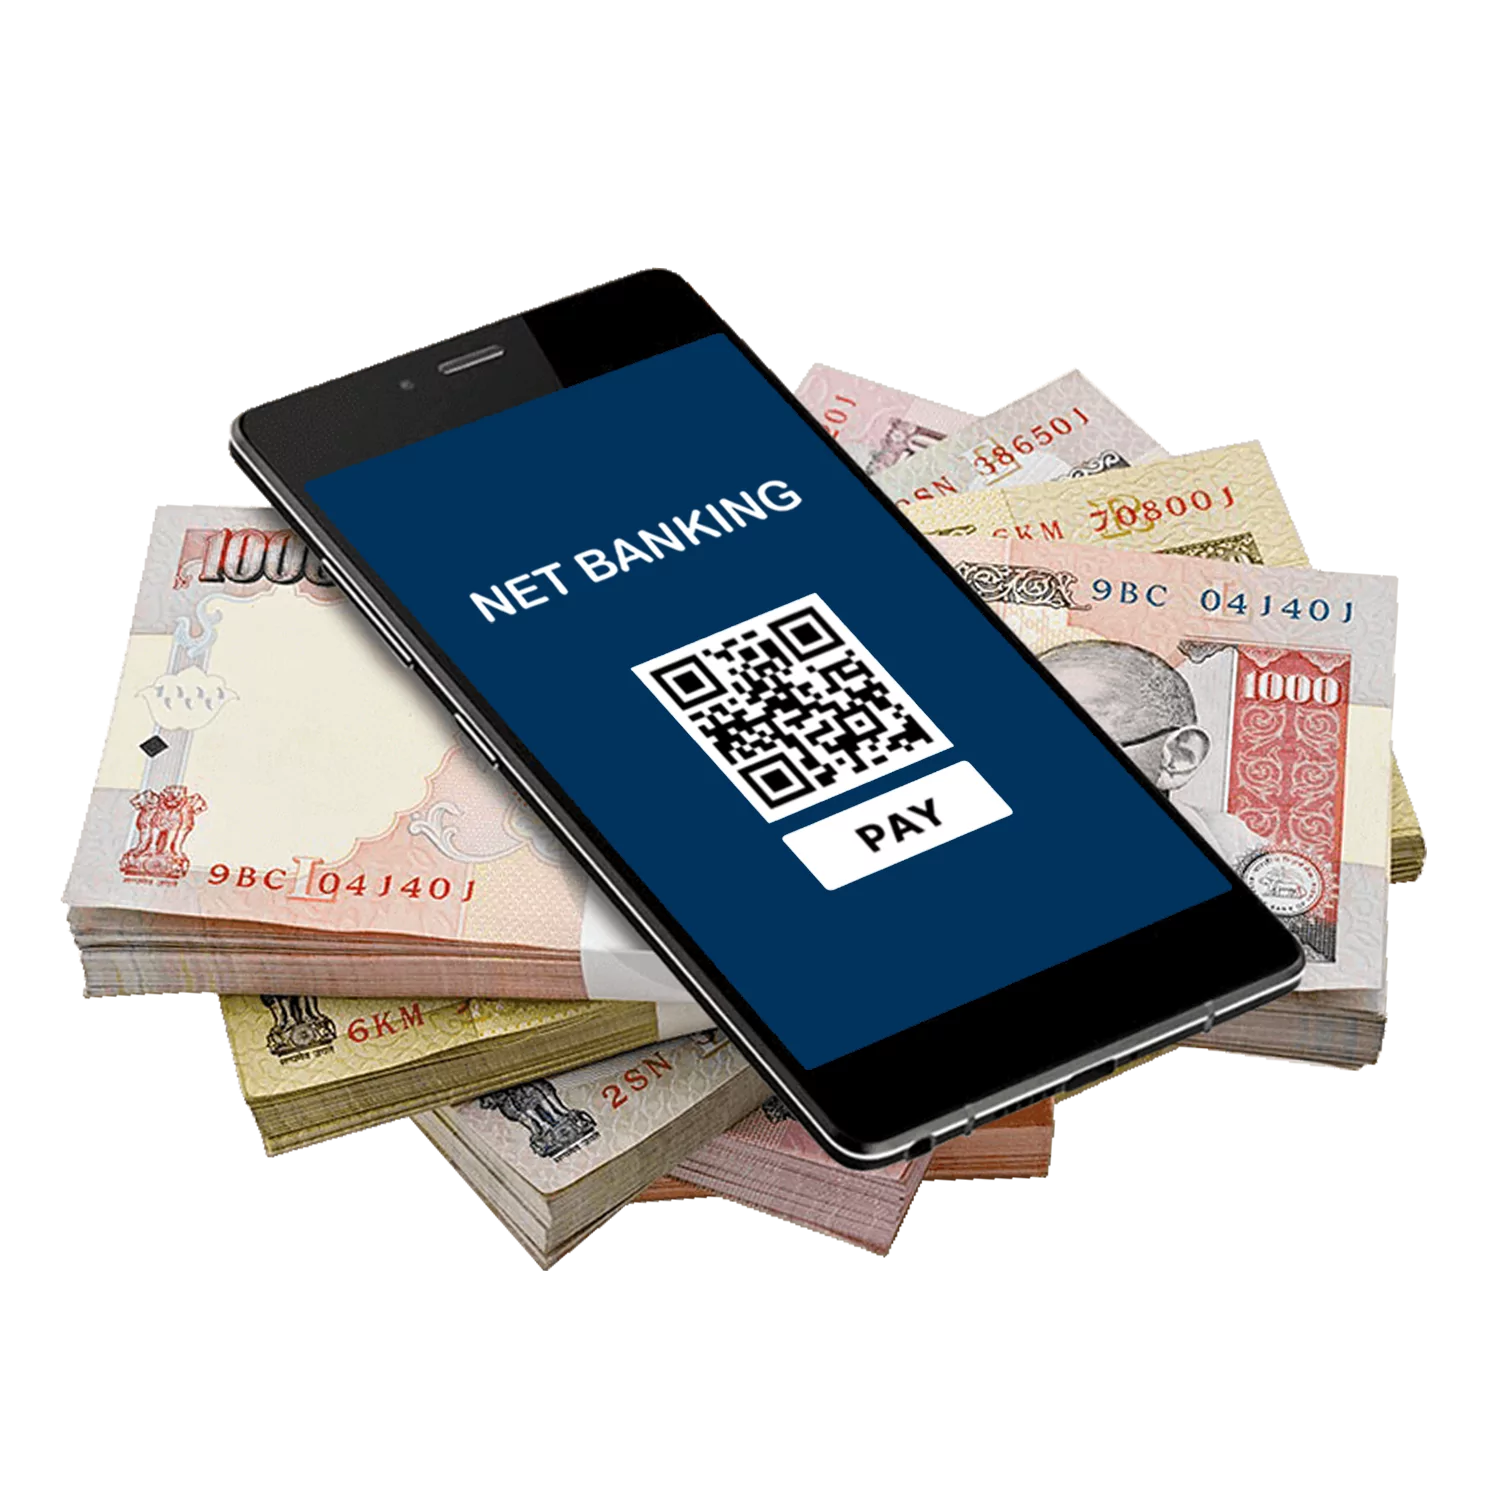 Learn more about using installation and using Net Banking.